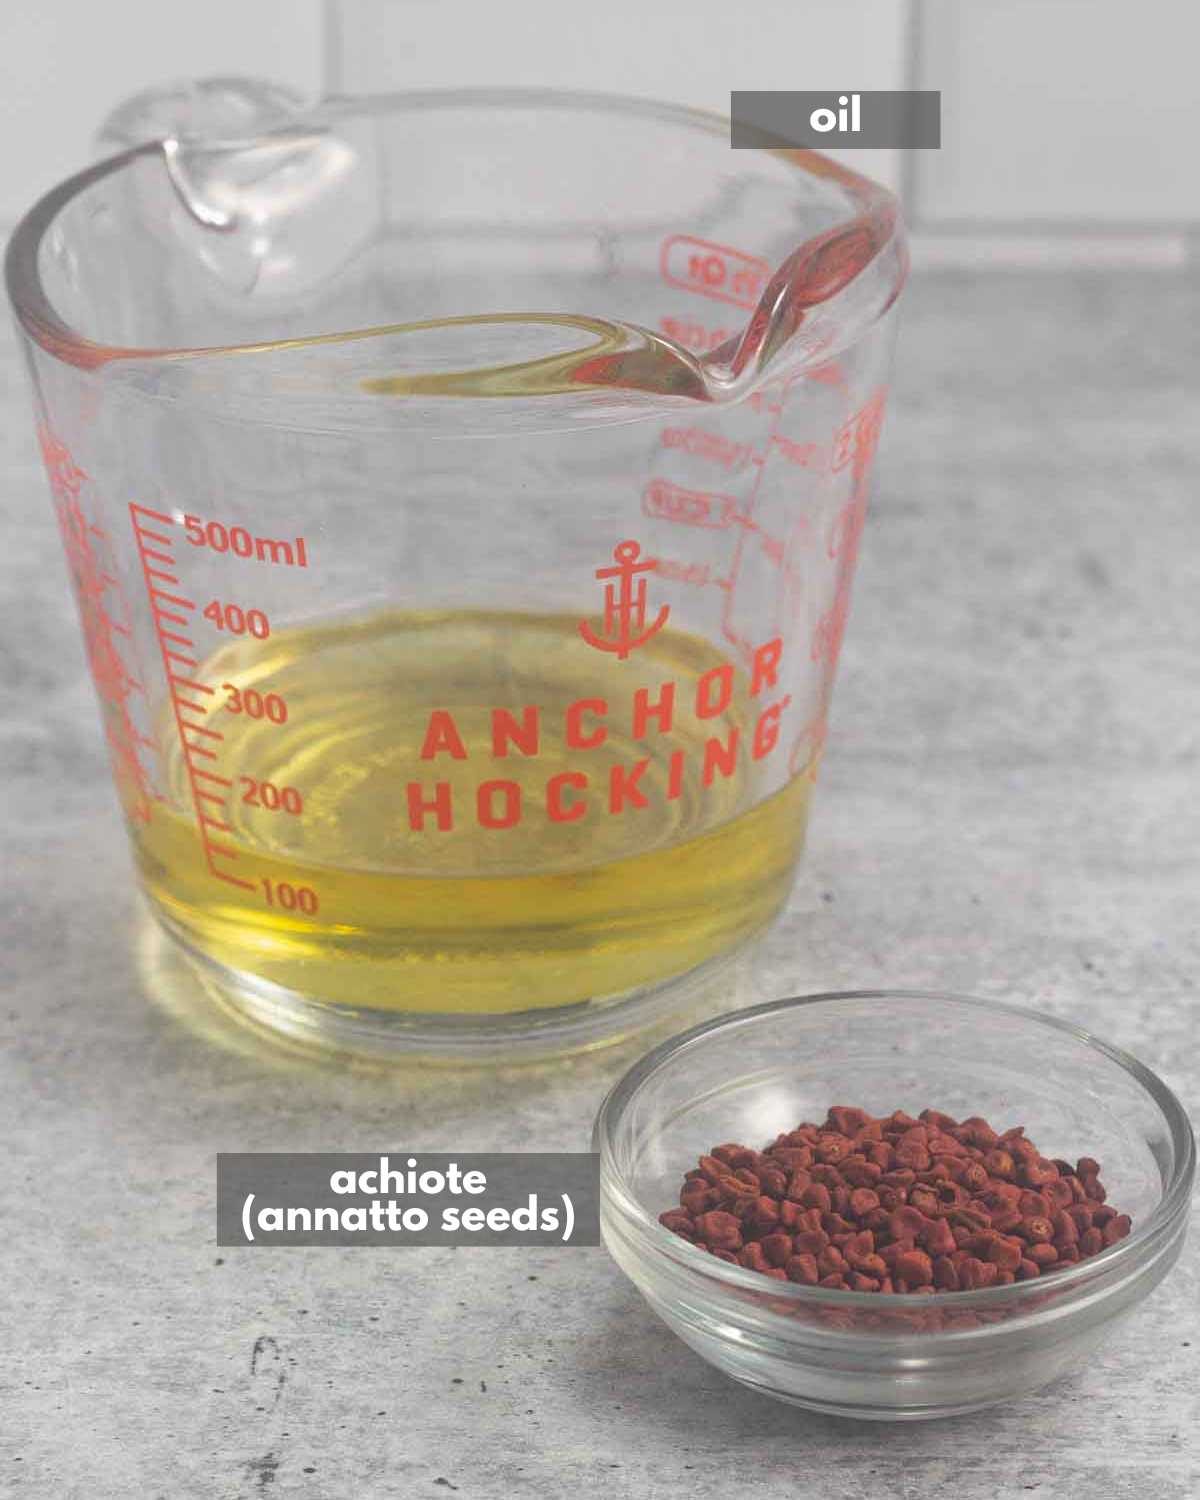 A liquid measuring cup with oil and a small bowl with annatto seeds.